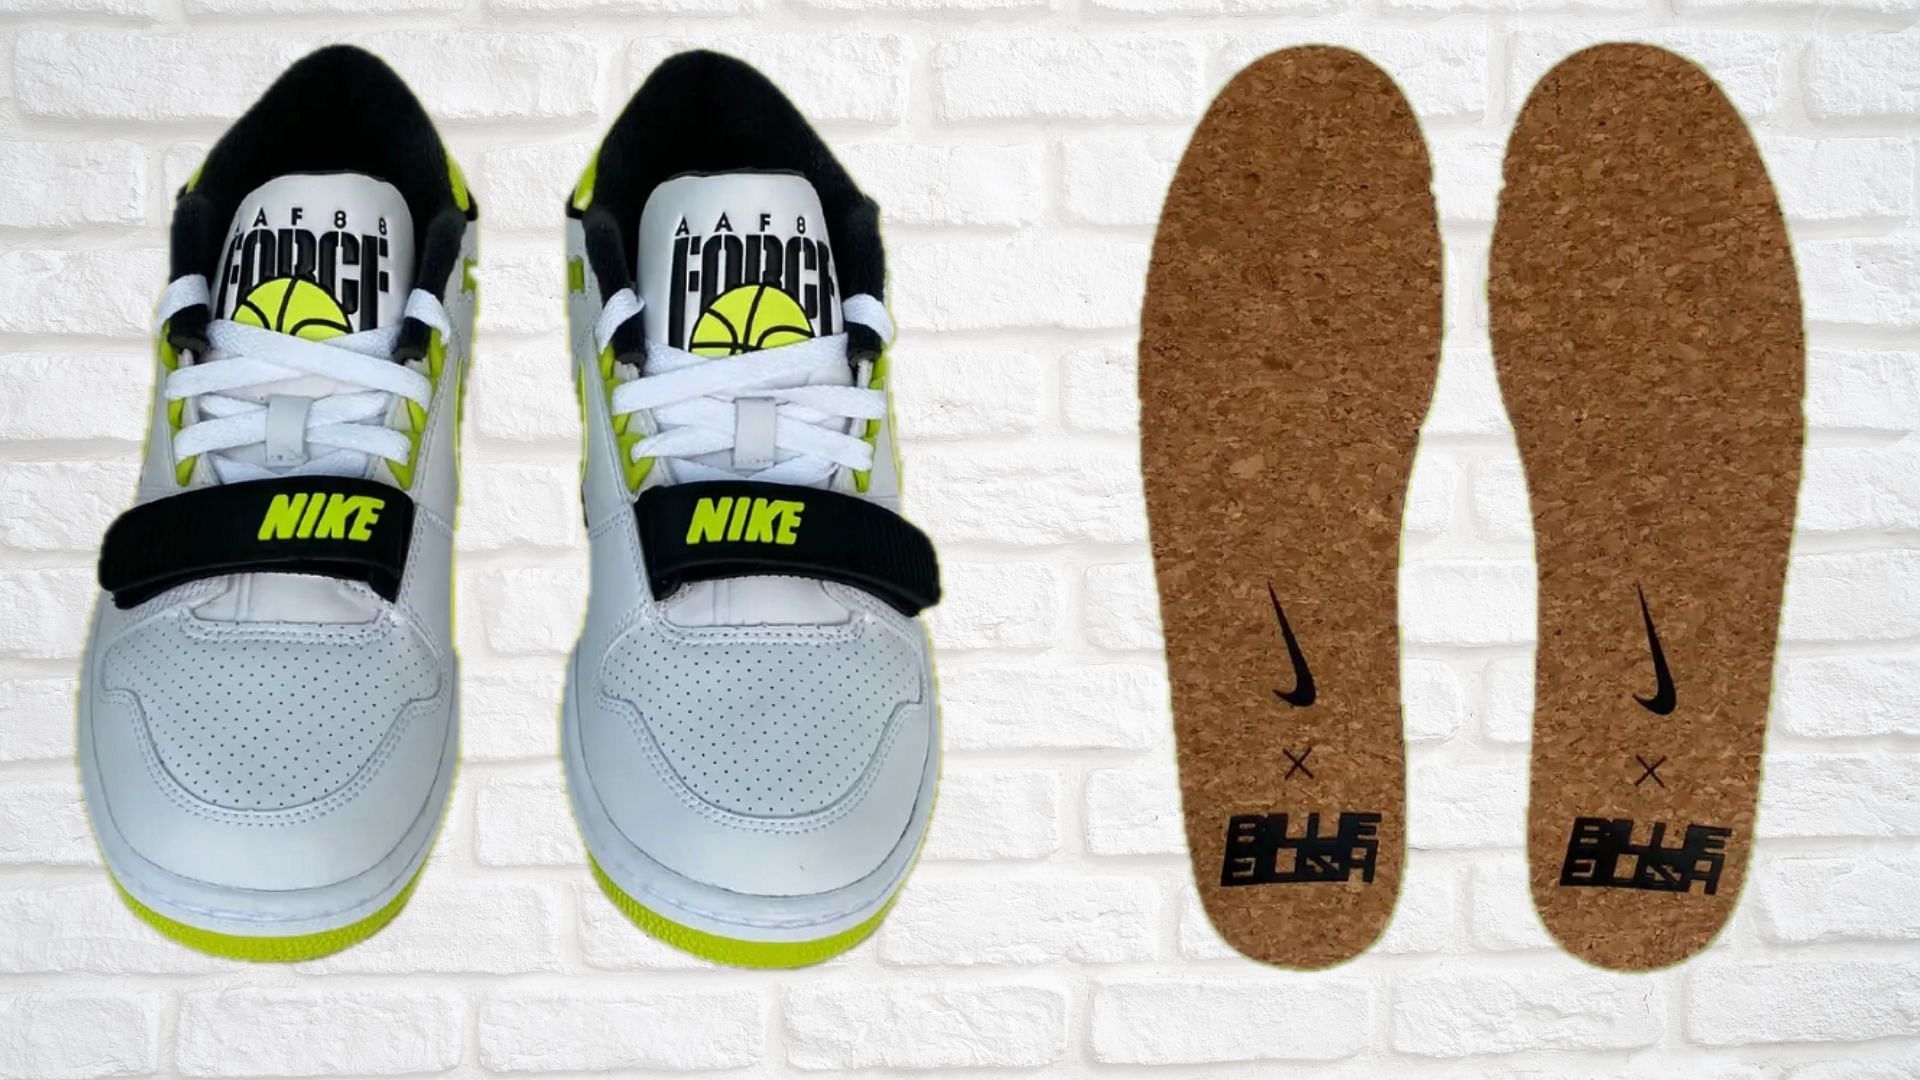 Take a closer look at the insoles and uppers of the shoes (Image via Sole Retriever)